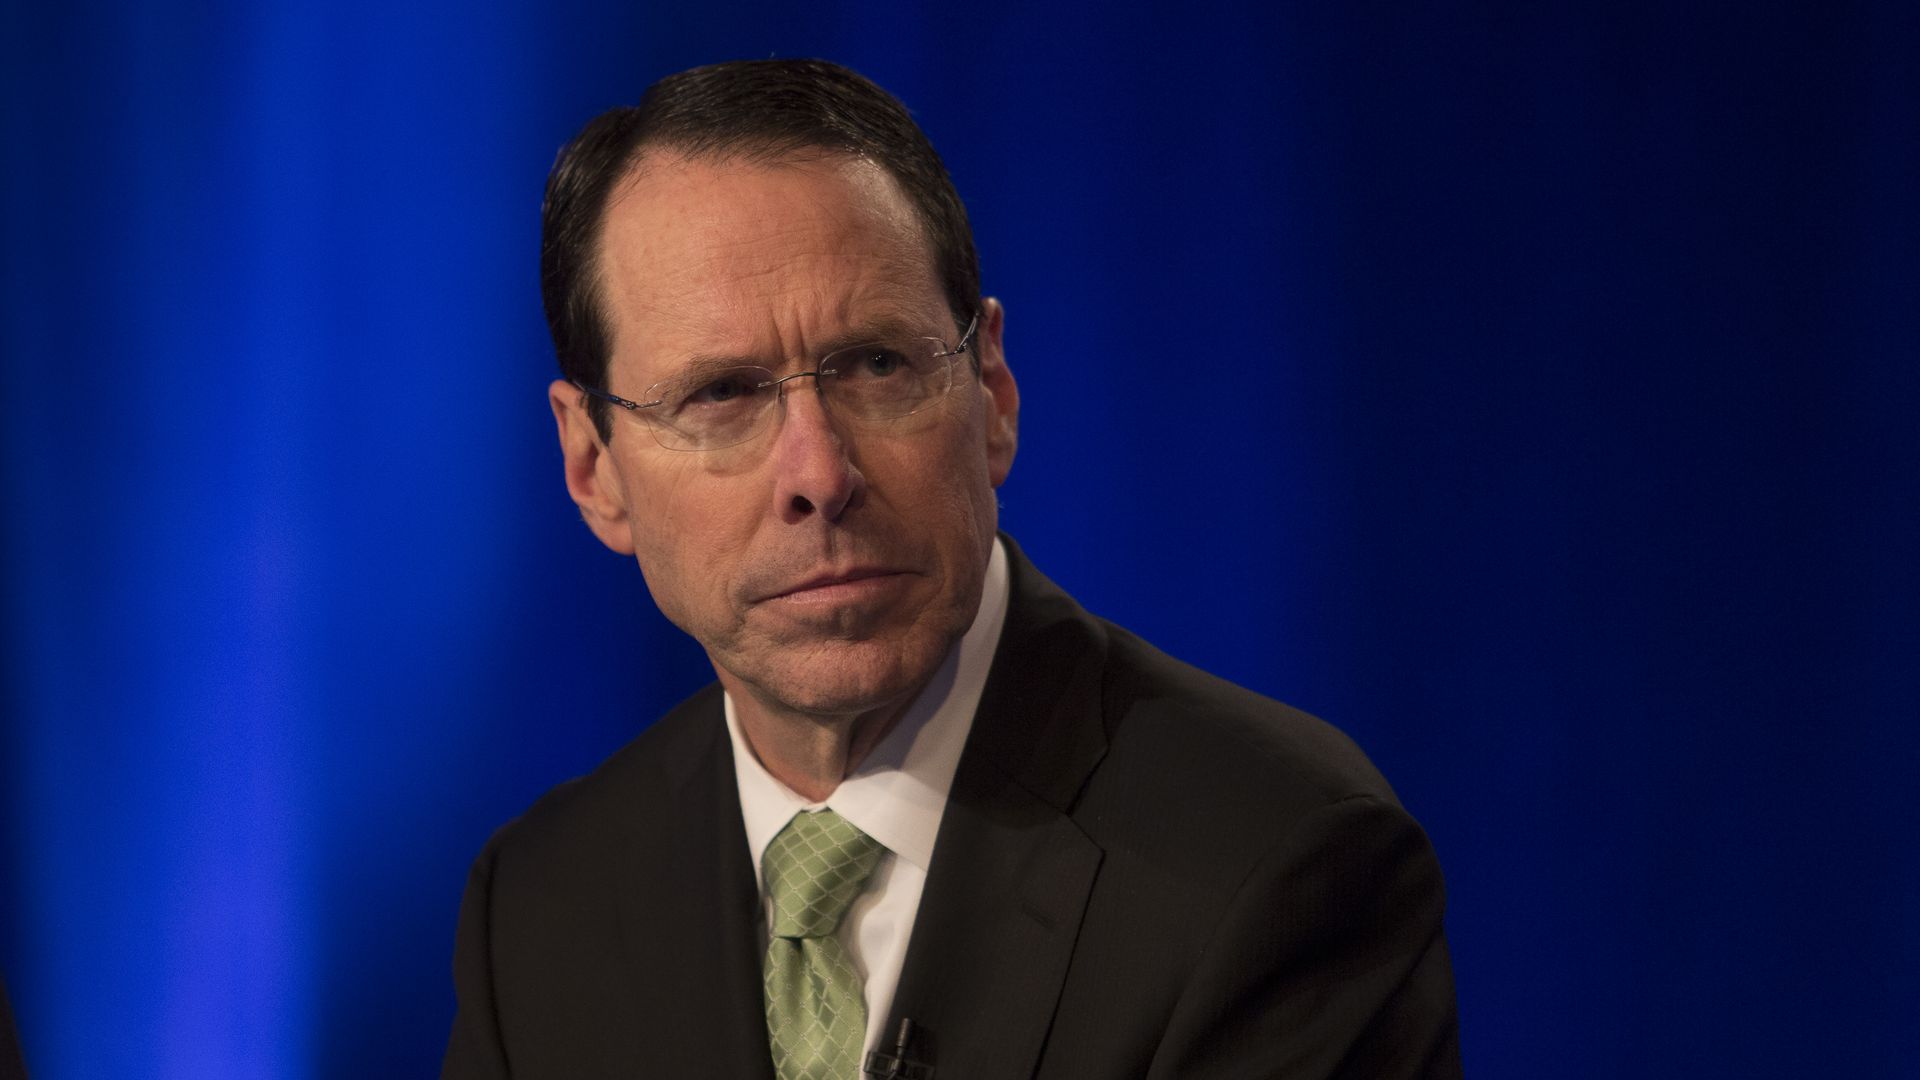 AT&T CEO Randall Stephenson sits in front of a blue backdrop